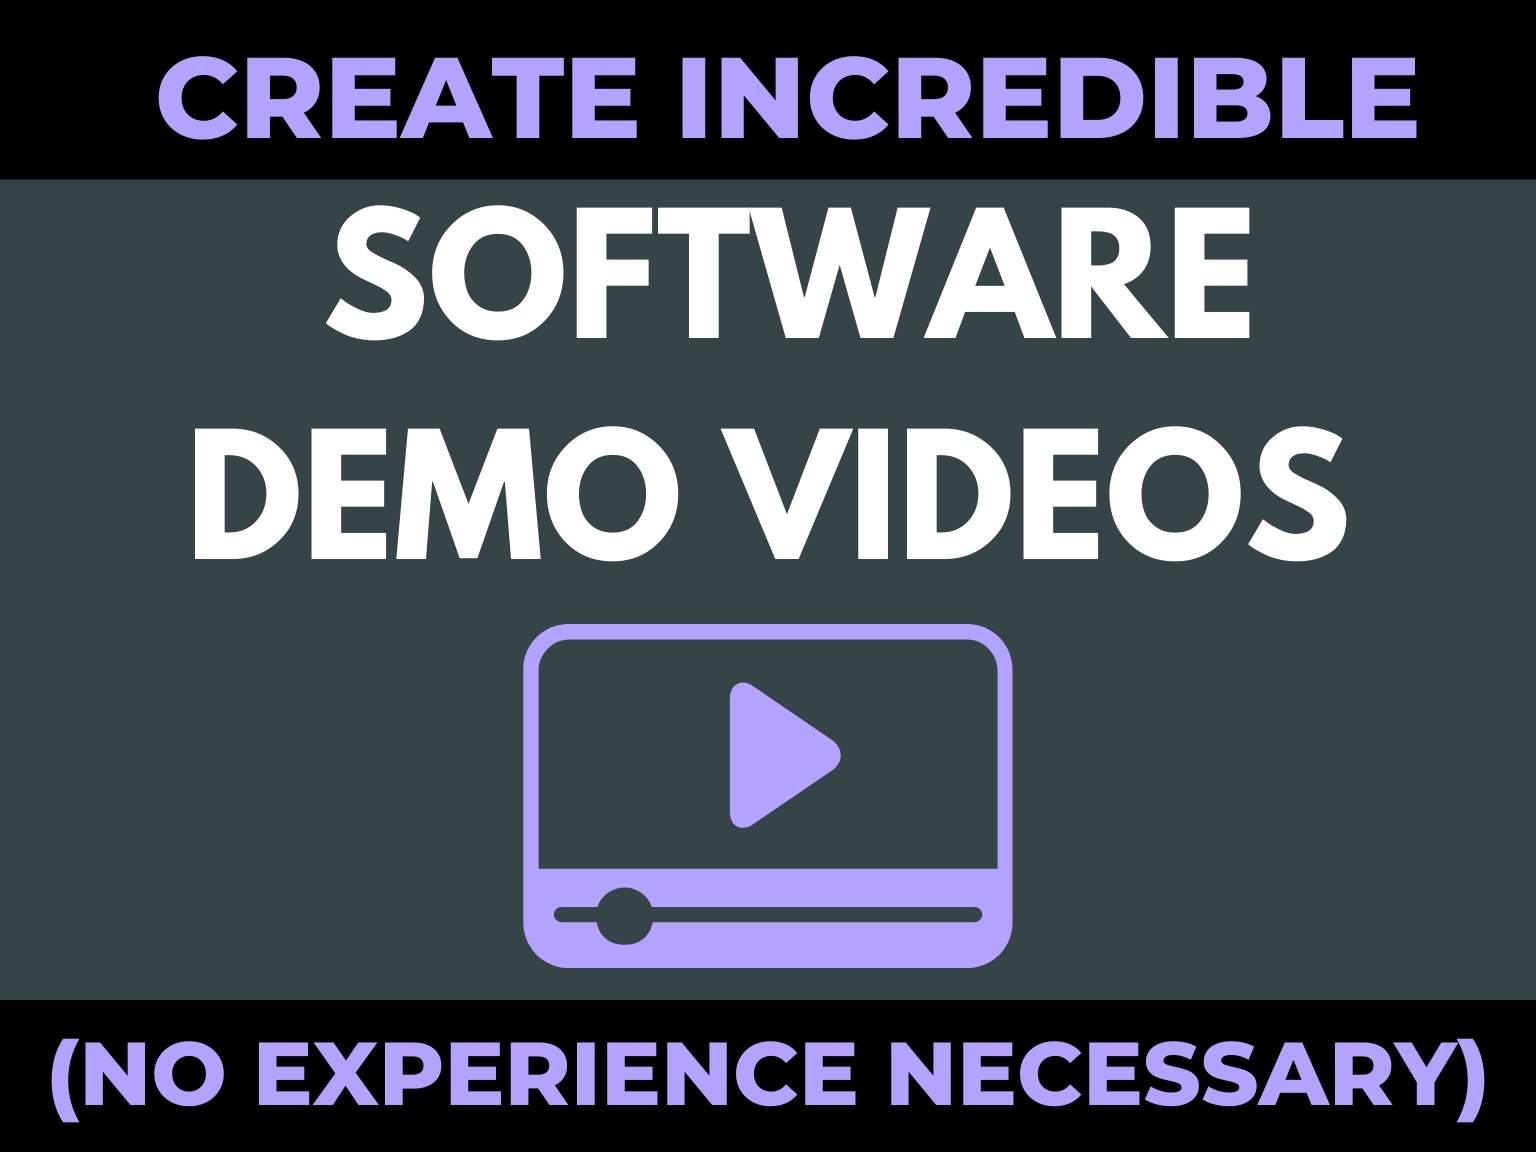 How to Create Incredible Software Demo Videos